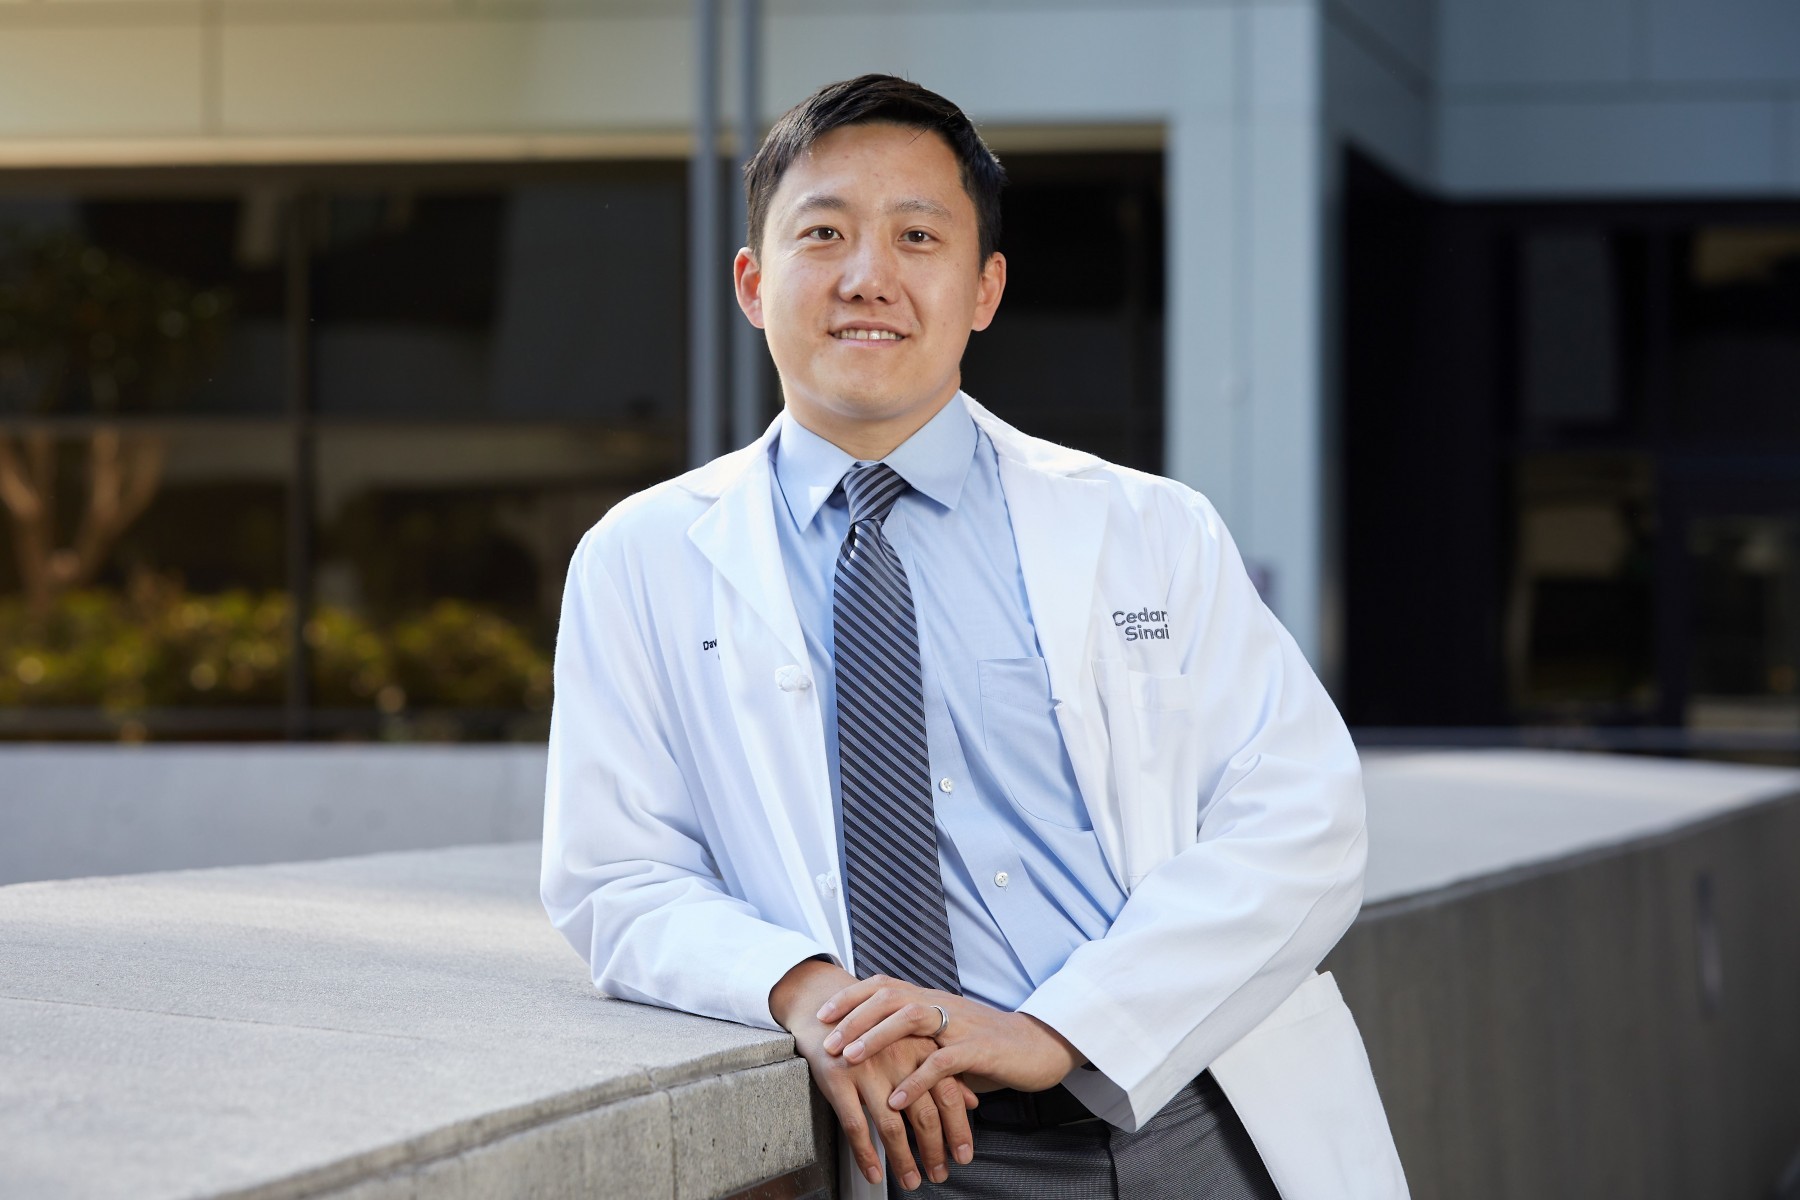 A new study, led by David Ouyang, MD, a cardiologist in the Smidt Heart Institute and a researcher in the Division of Artificial Intelligence in Medicine, found individuals with spherical hearts were 31% more likely to develop atrial fibrillation and 24% more likely to develop cardiomyopathy, a type of heart muscle disease.